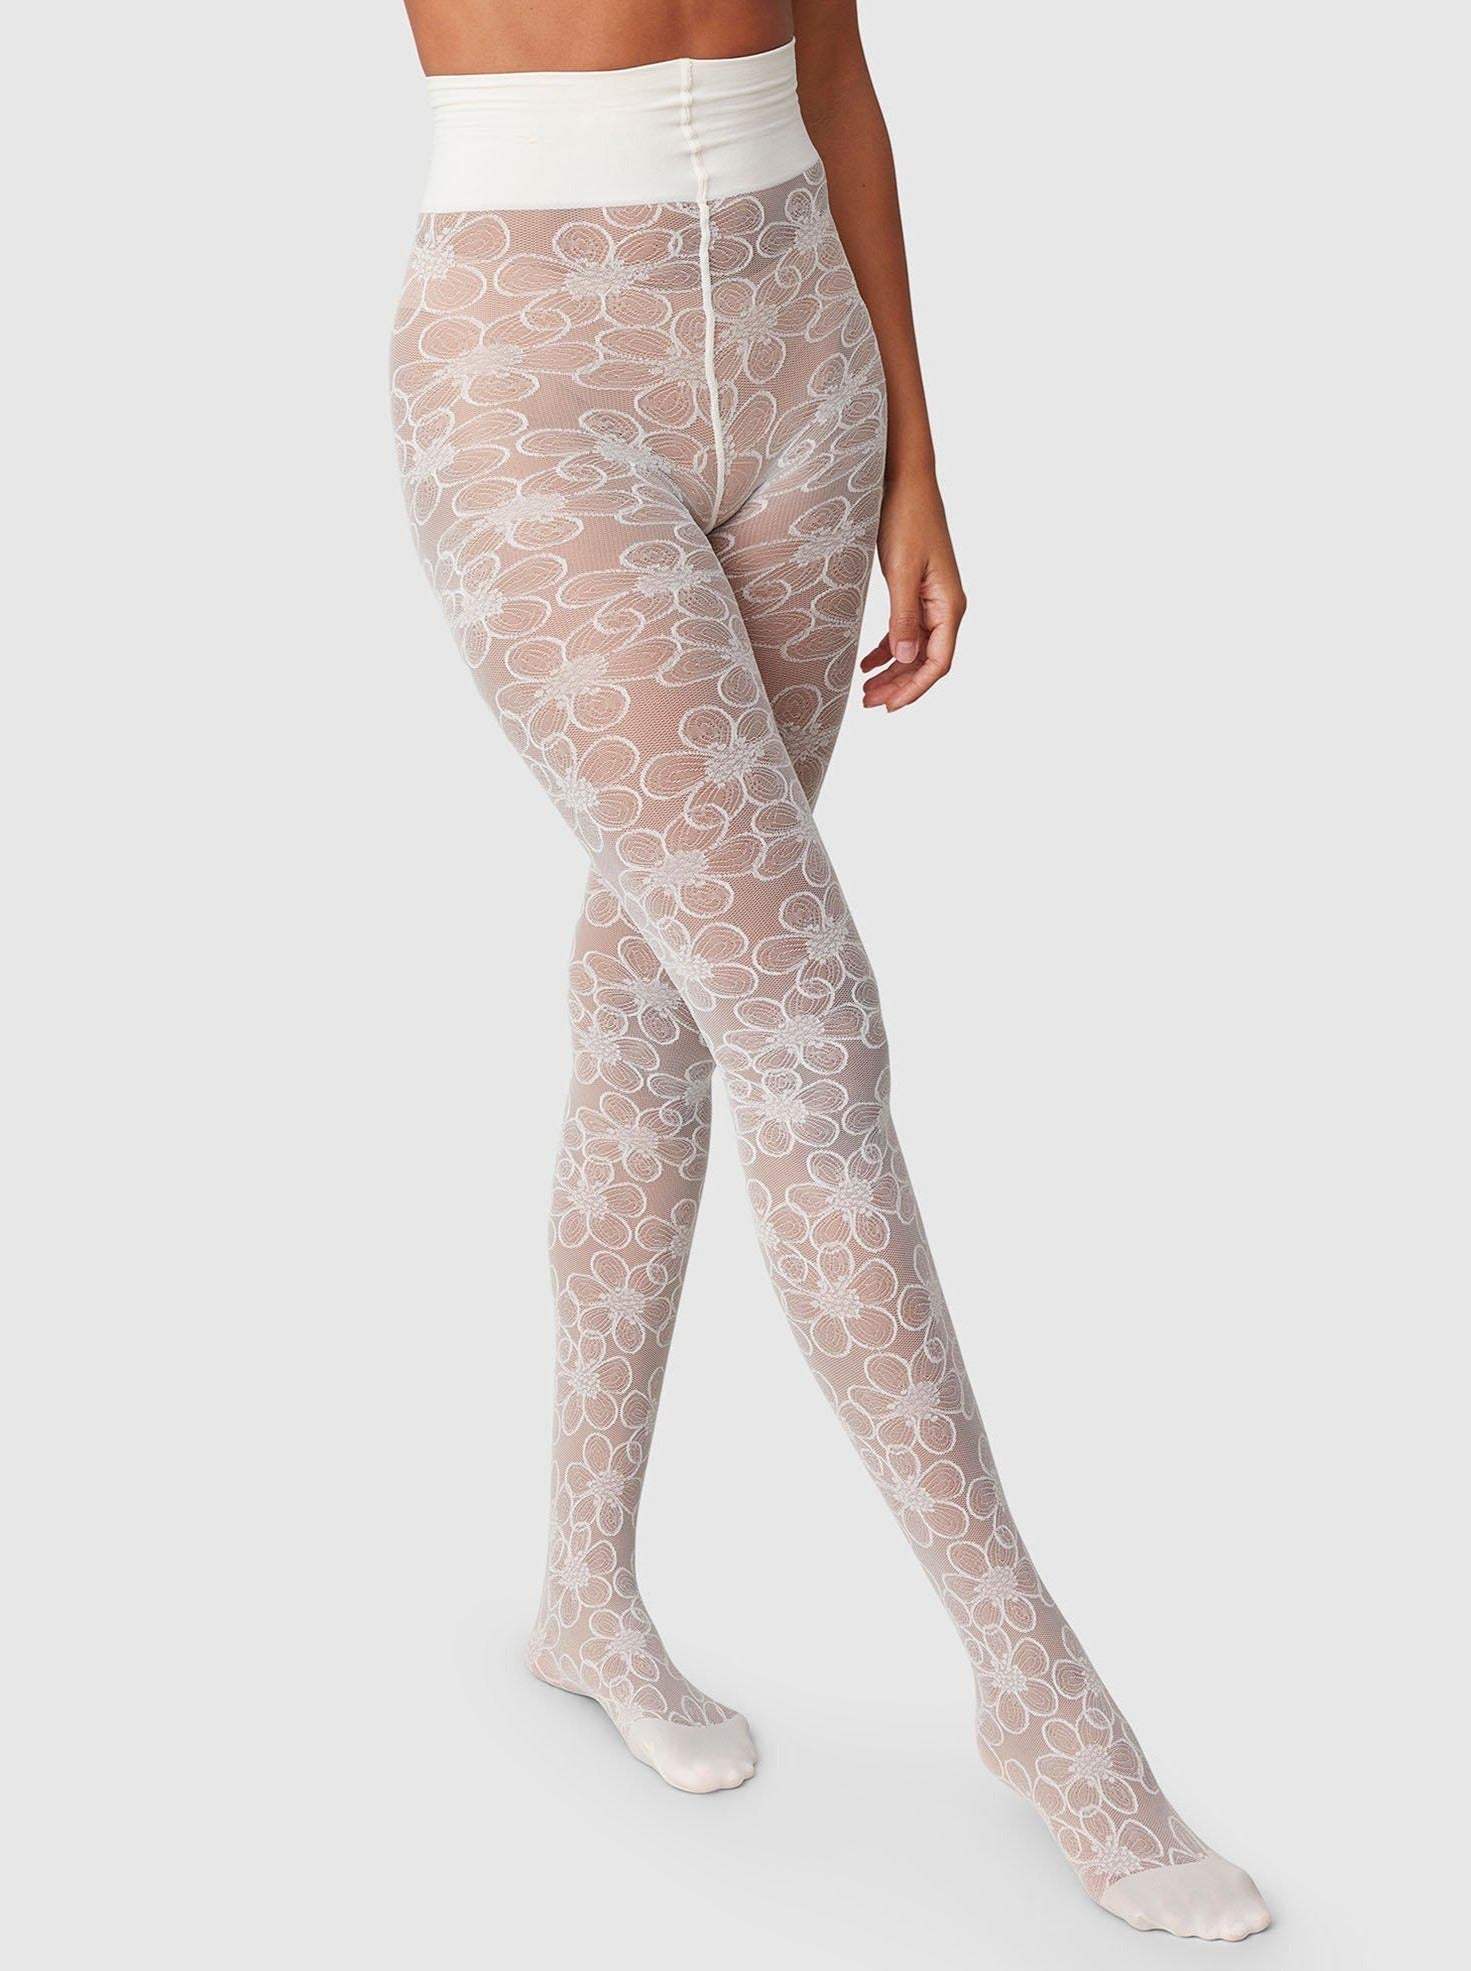 Cute Floral Border Mid Thick Stockings Tights, IVORY 